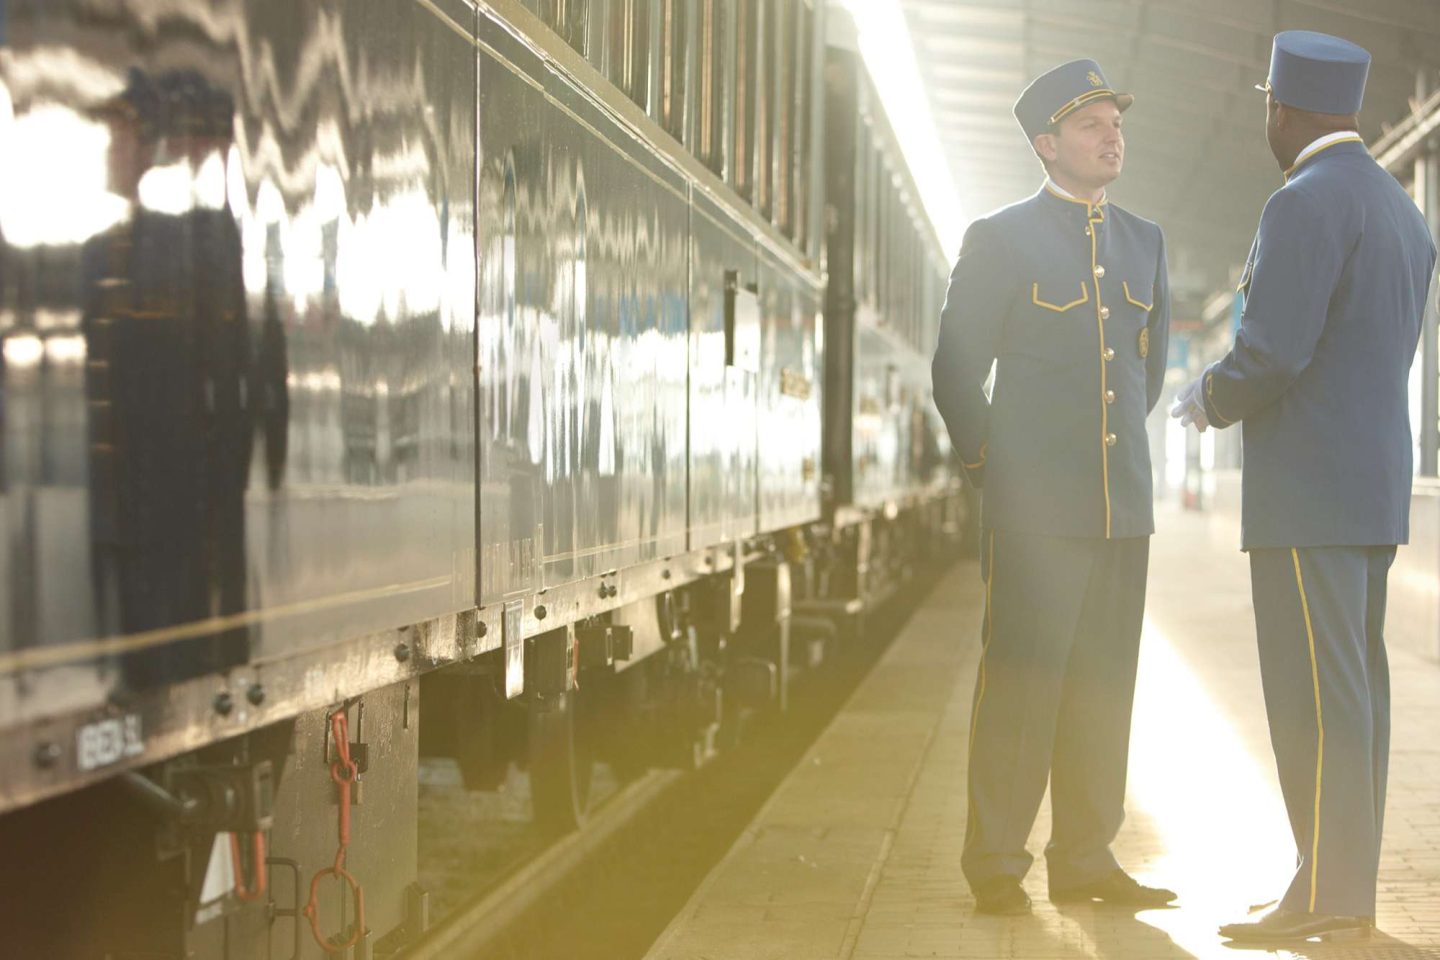 orient express in station train guards